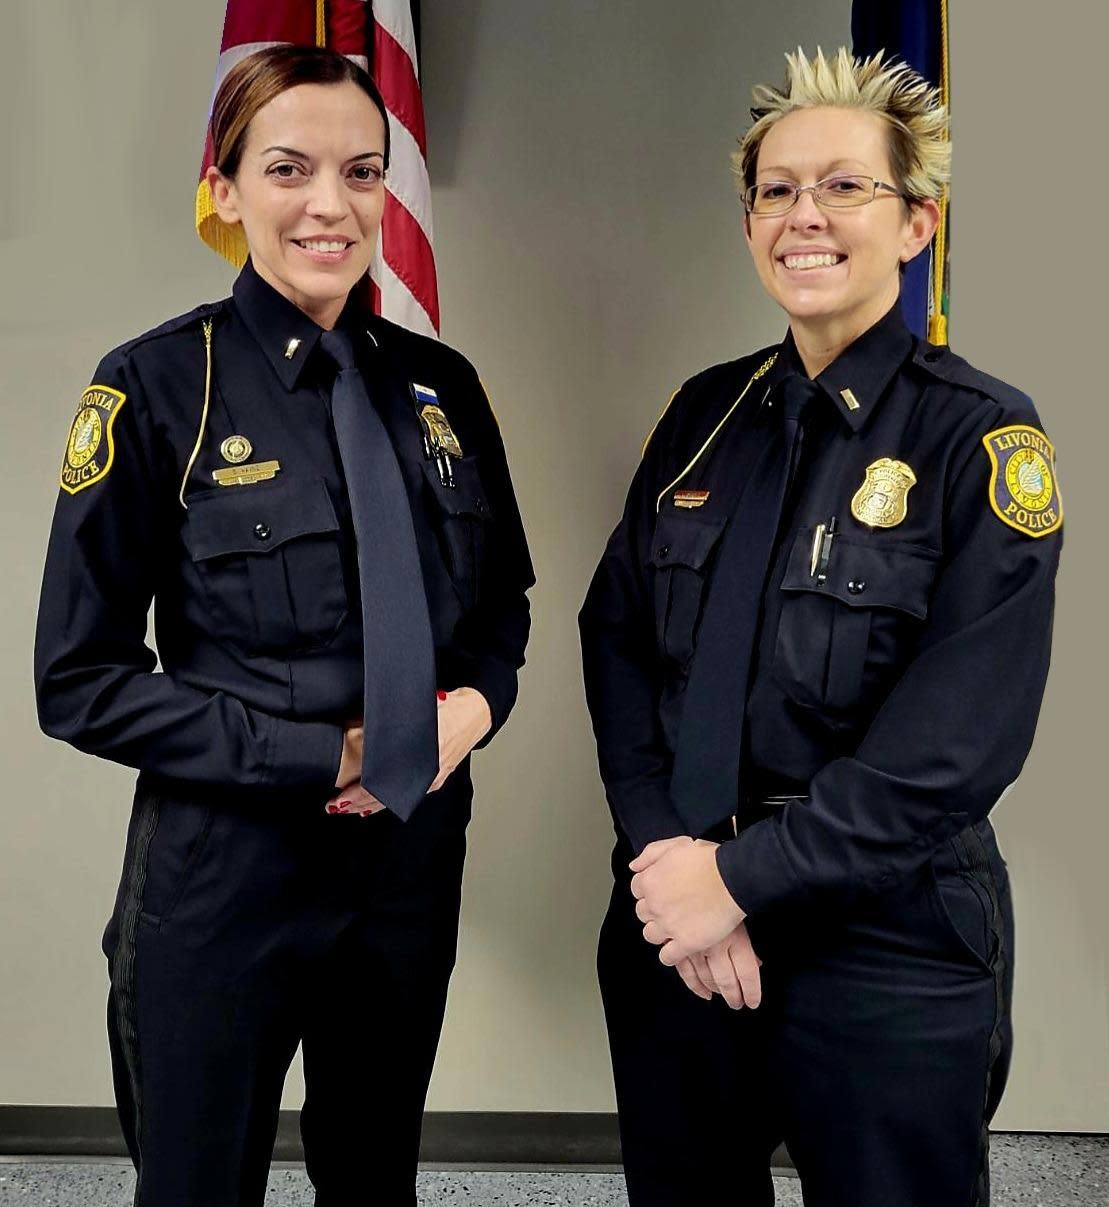 The Livonia Police Department promoted Stacy Hayne (left) and Jessica Sabbadin to lieutenant, making it the first time the department had two women serve in that role at the same time. / Credit: Livonia Police Department